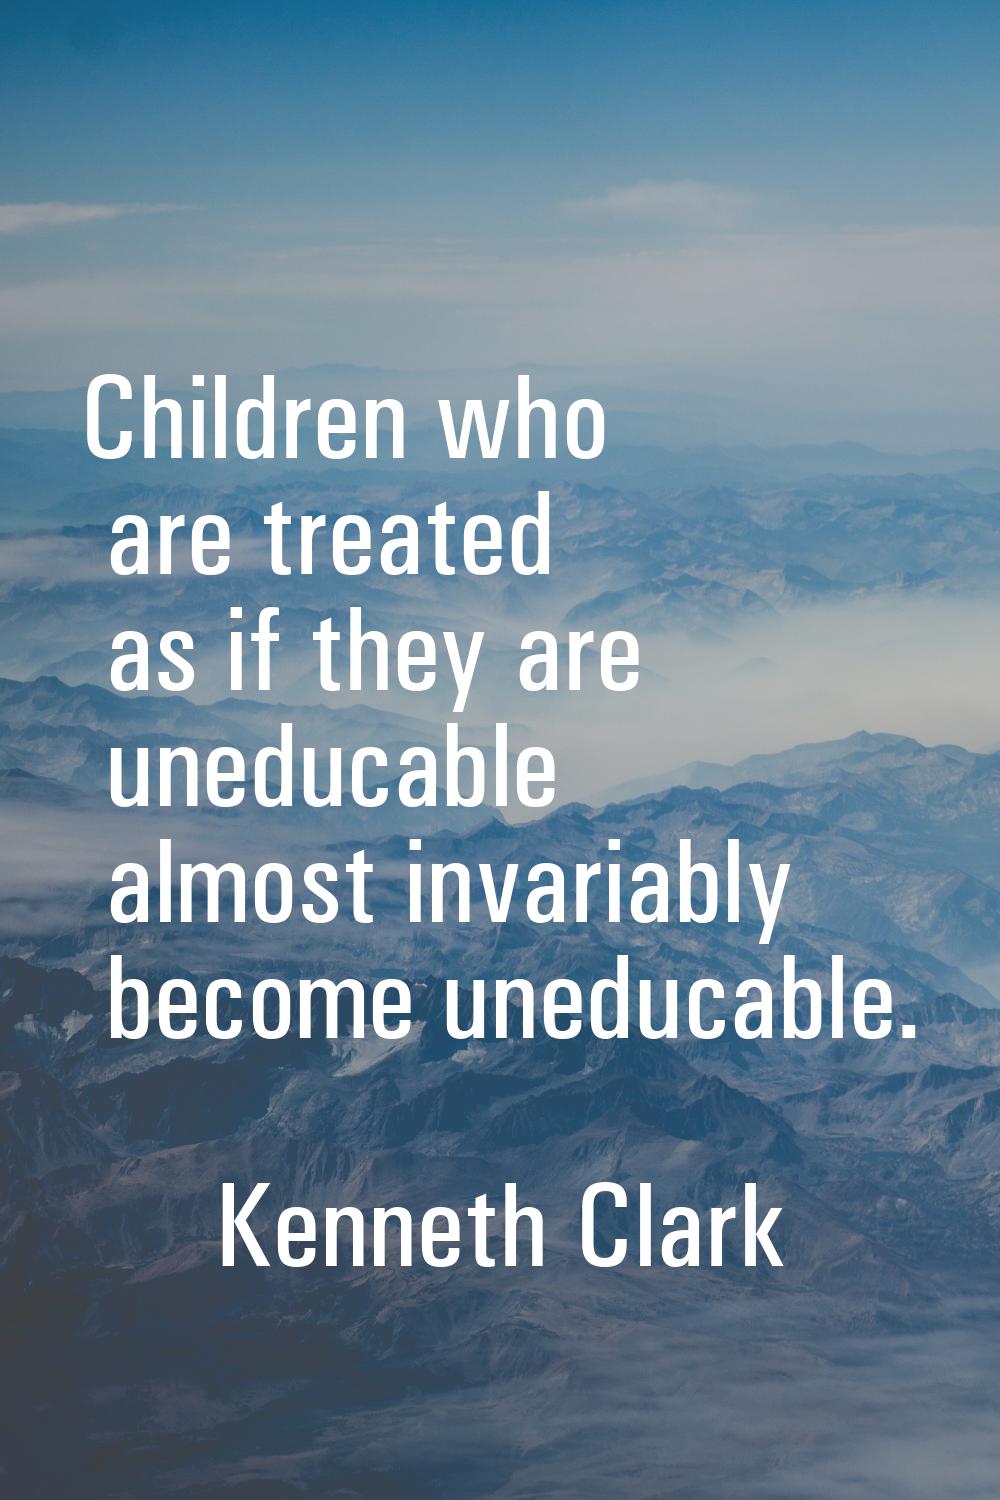 Children who are treated as if they are uneducable almost invariably become uneducable.